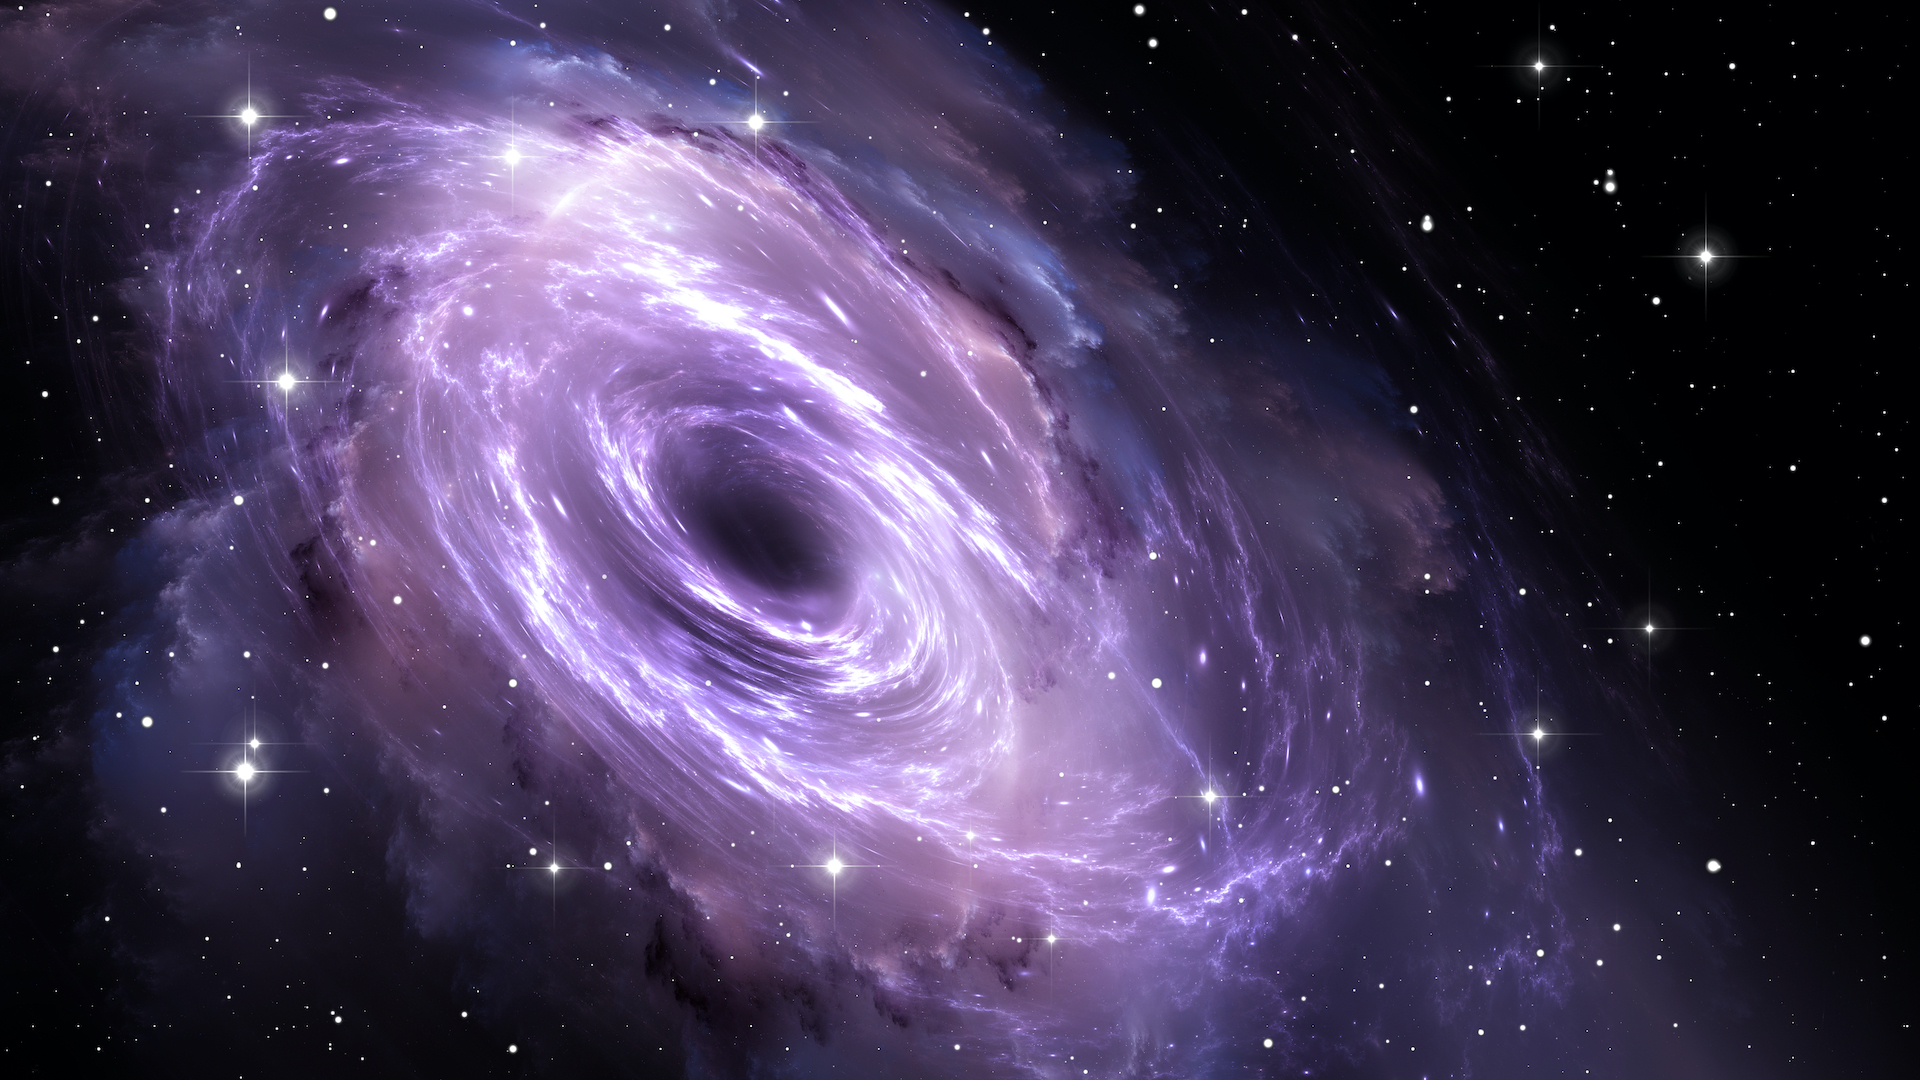 A black hole surrounded by stars